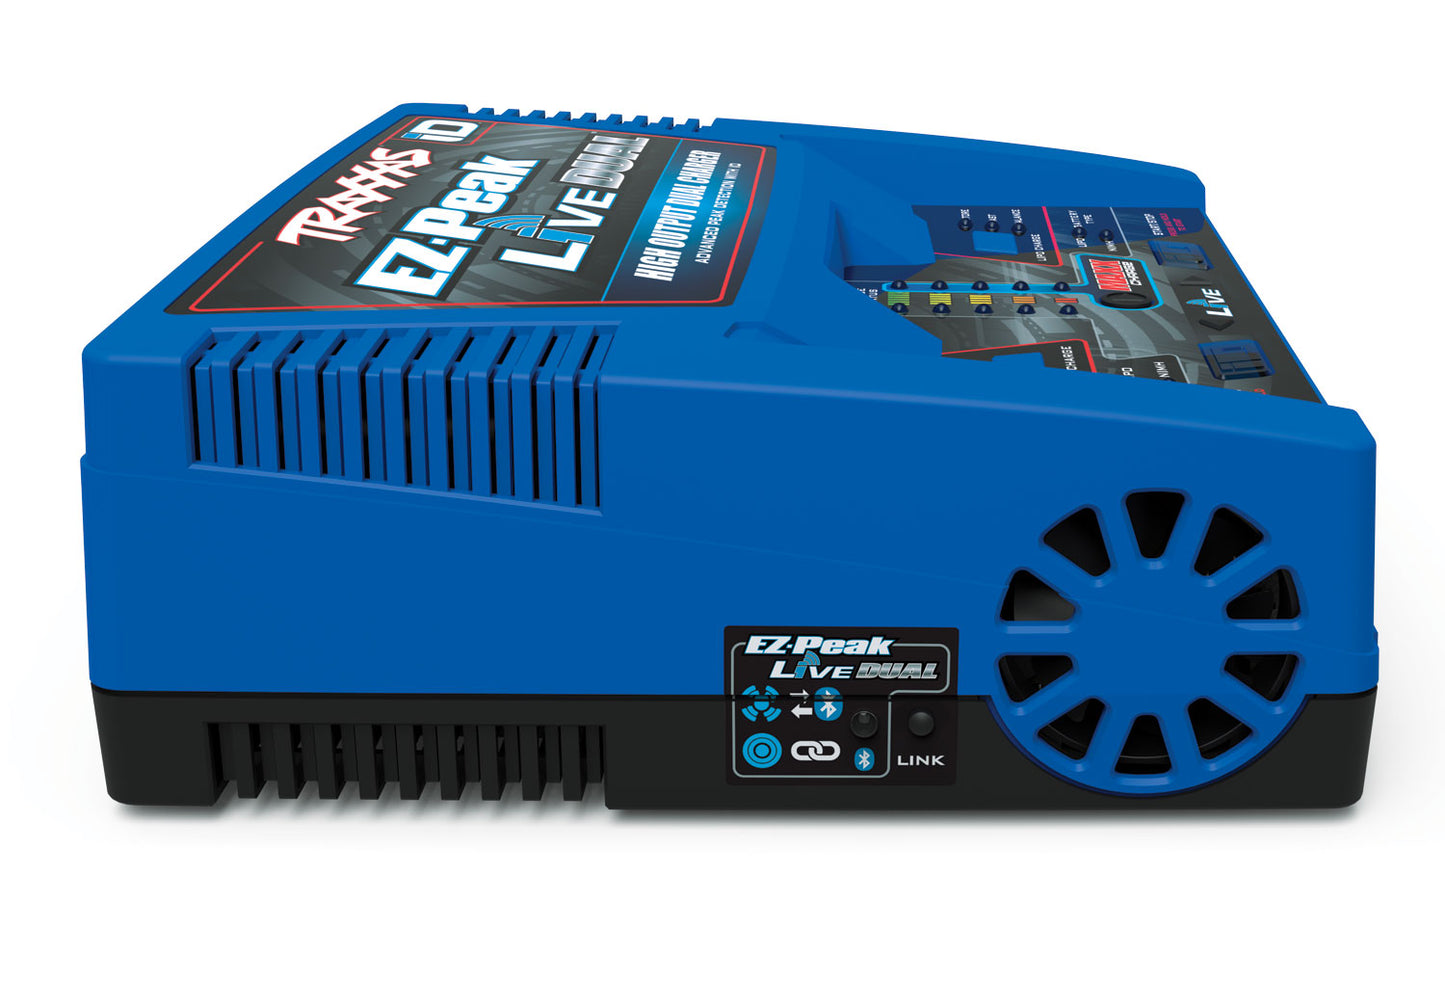 Charger, Ez-Peak Live Dual, 200W, Nimh/Lipo With Id Auto Battery Identification